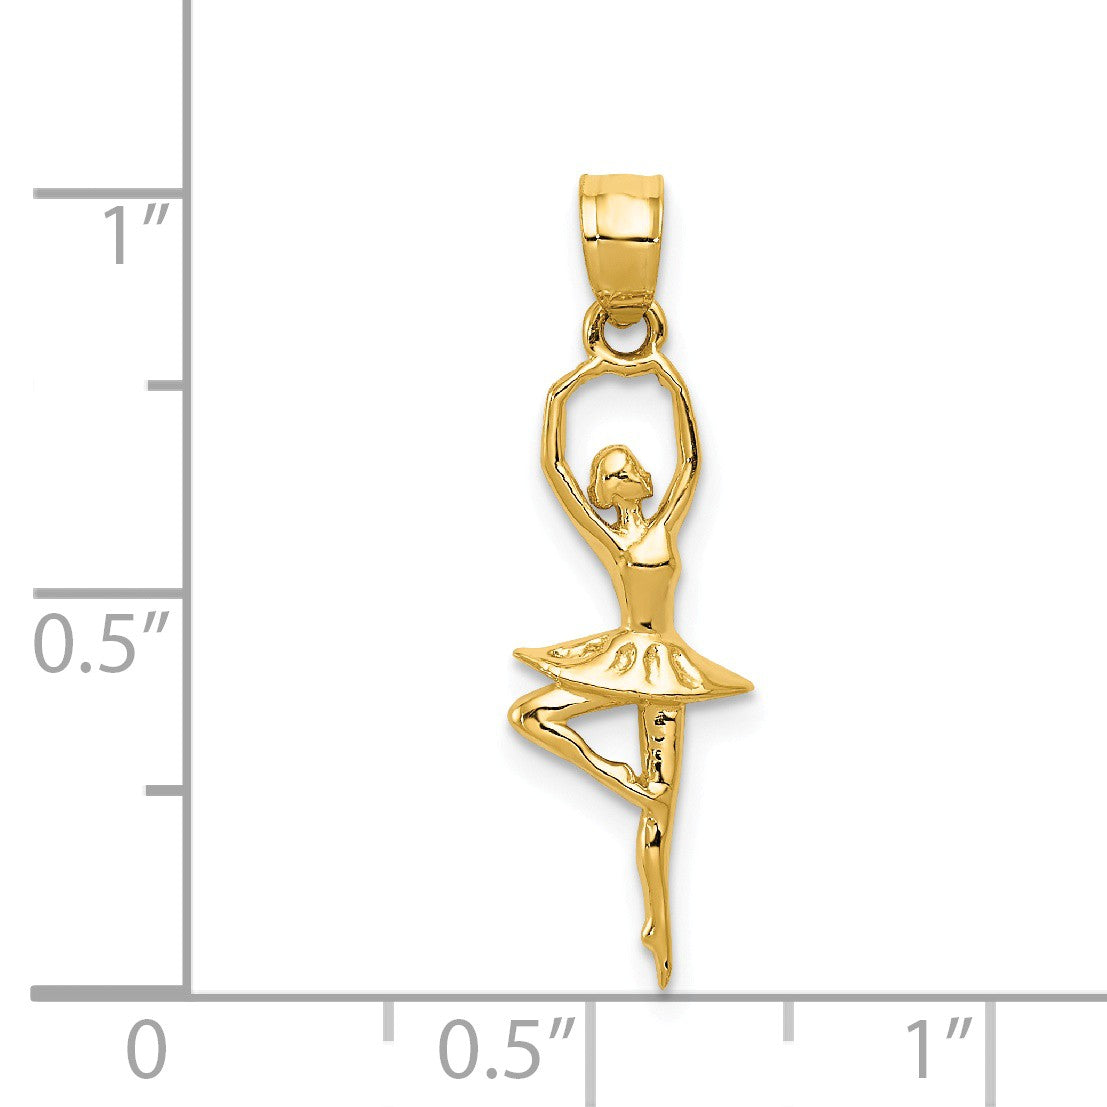 Alternate view of the 14k Yellow Gold Pointe Ballerina Pendant, 8 x 27mm by The Black Bow Jewelry Co.